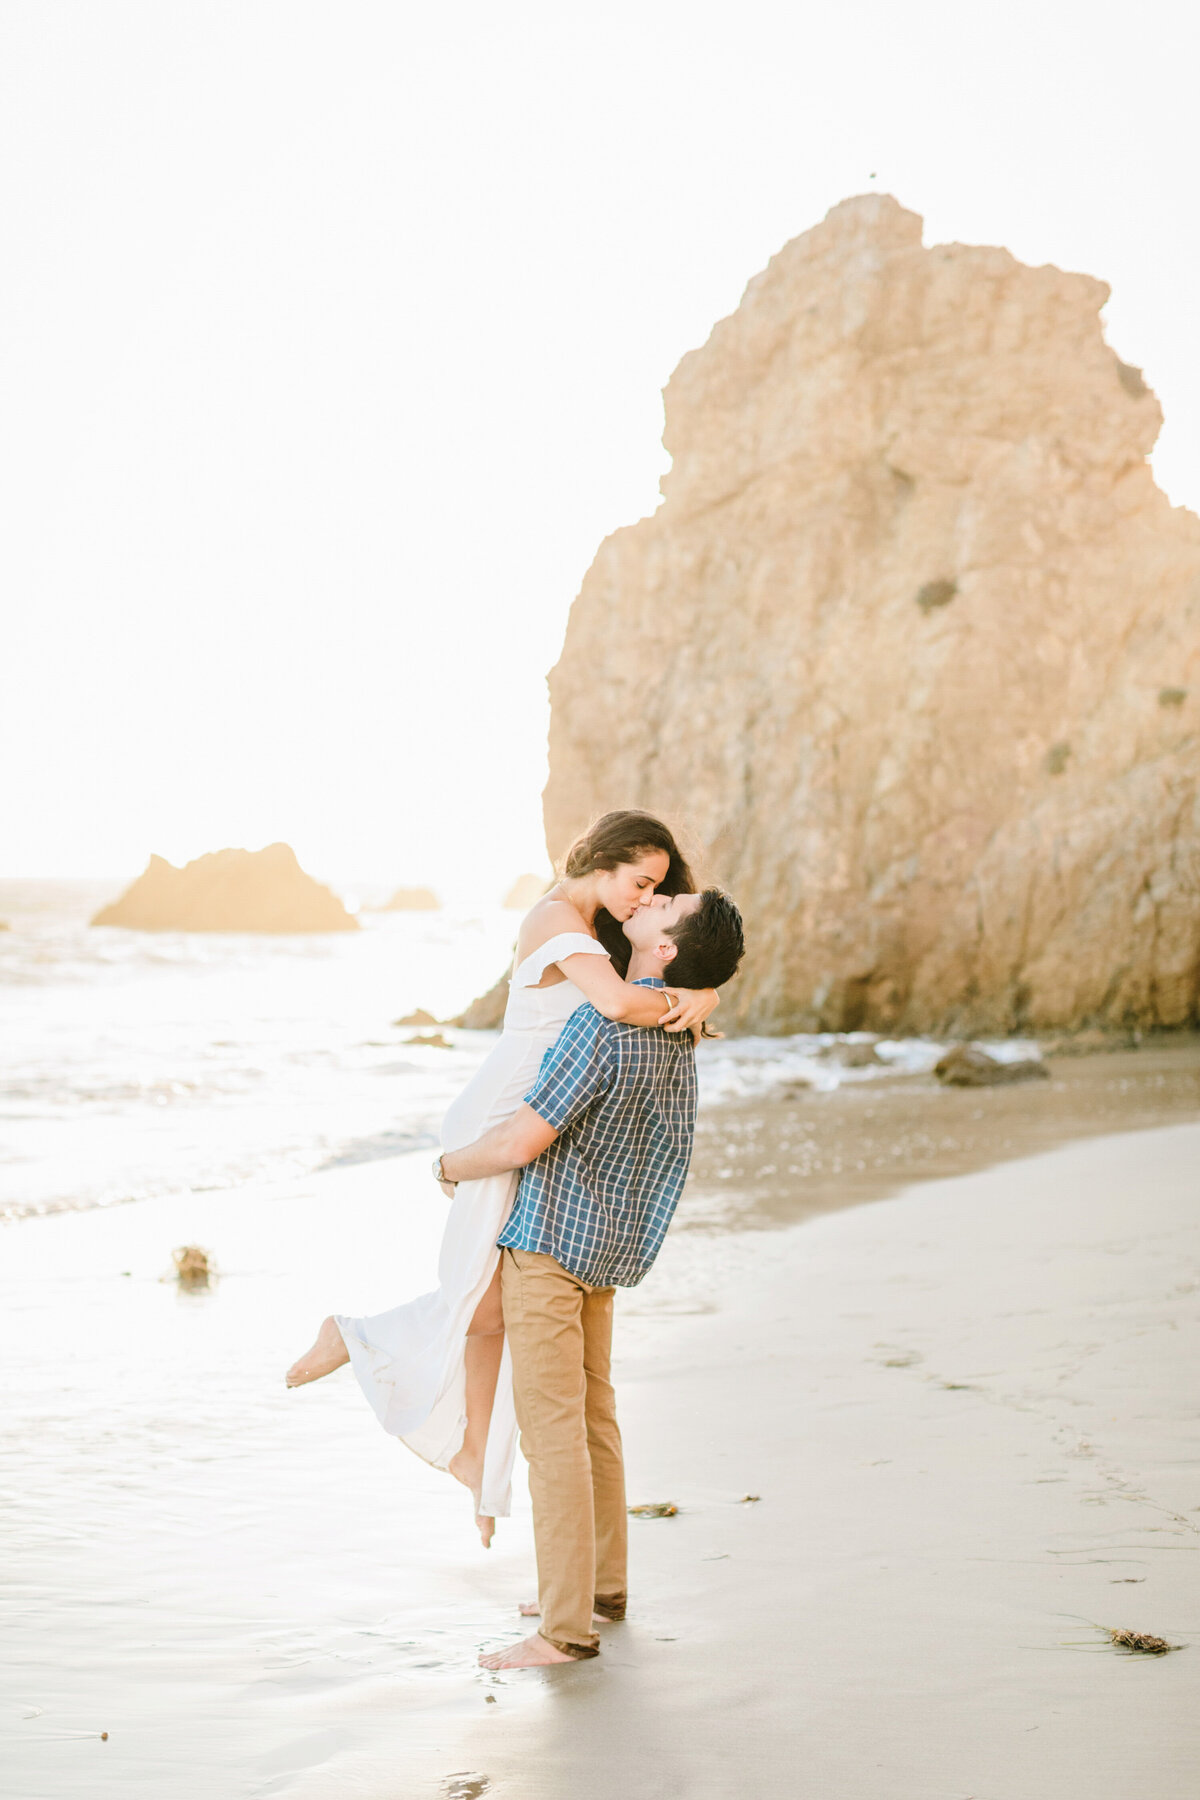 Best California and Texas Engagement Photos-Jodee Friday & Co-122